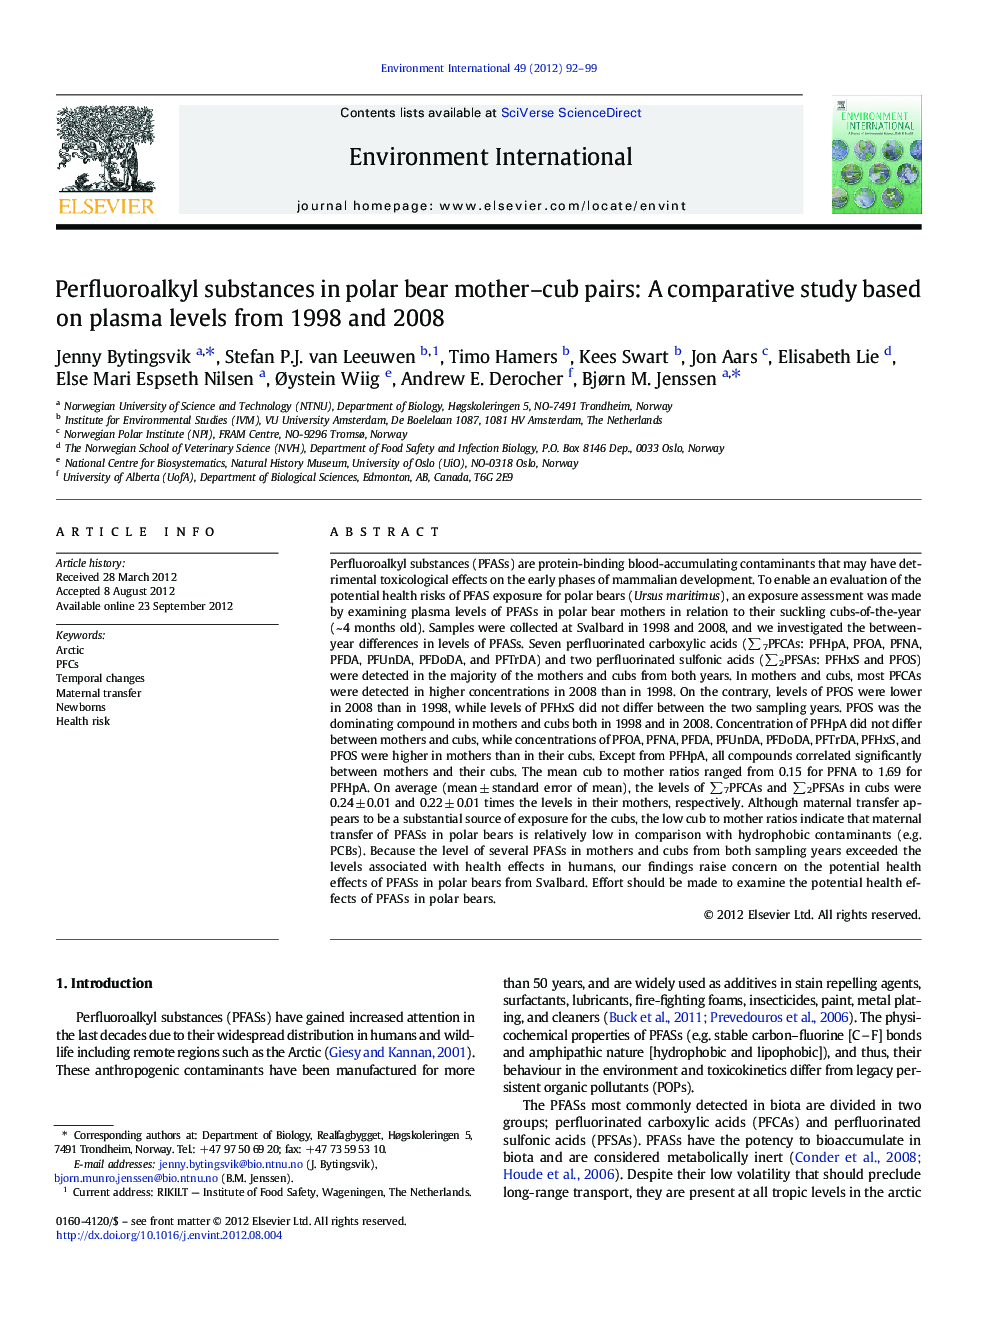 Perfluoroalkyl substances in polar bear mother-cub pairs: A comparative study based on plasma levels from 1998 and 2008